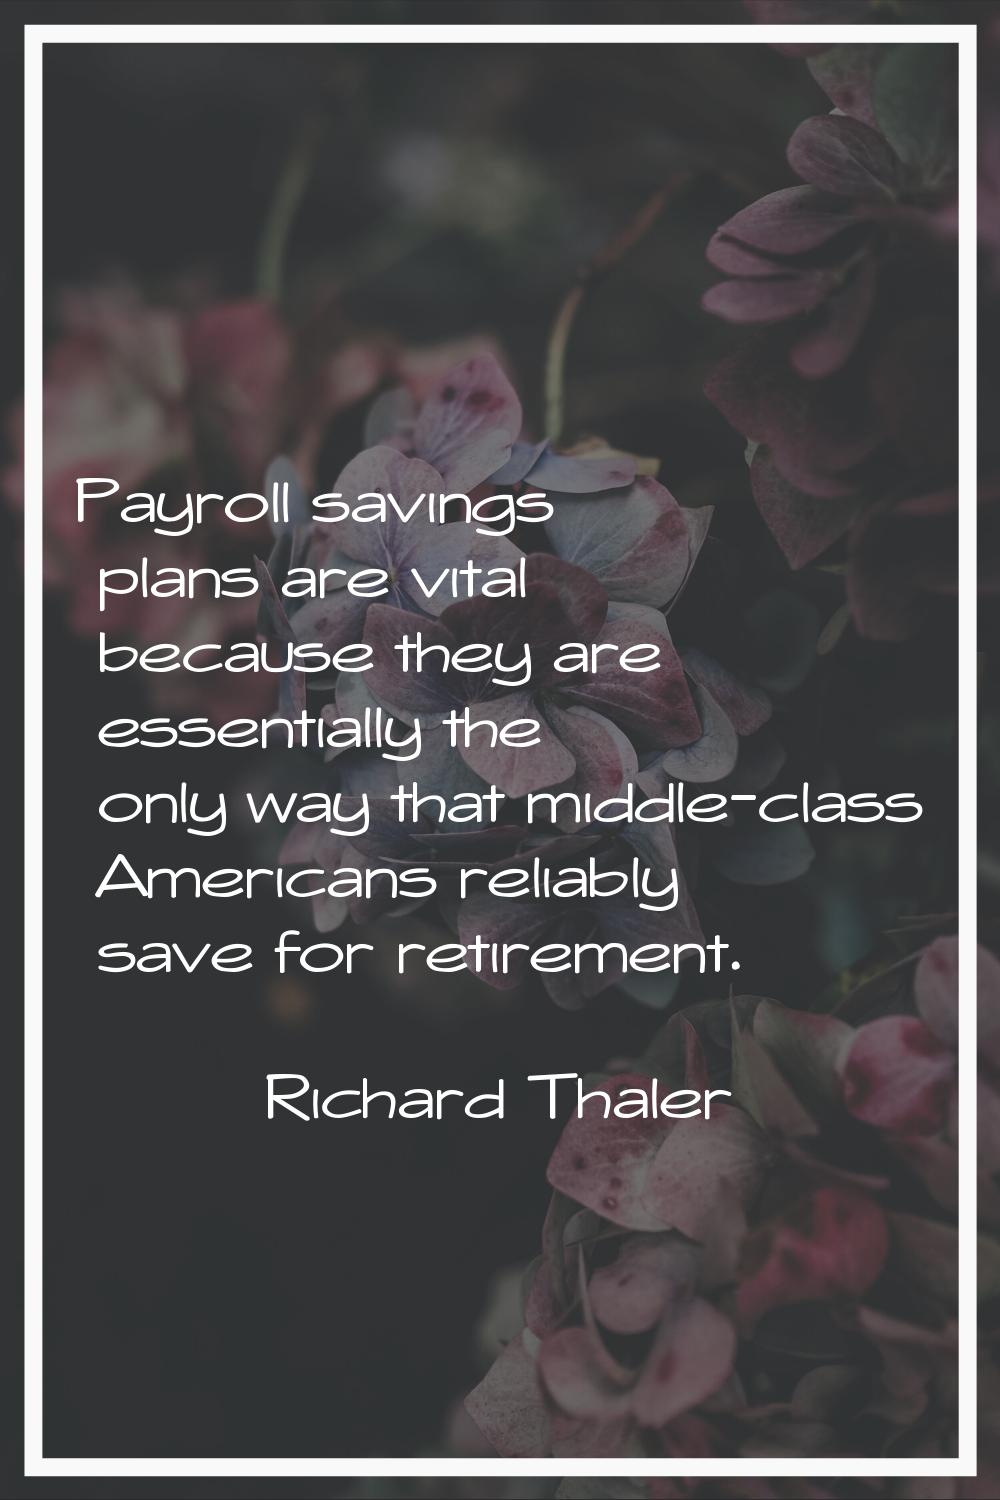 Payroll savings plans are vital because they are essentially the only way that middle-class America